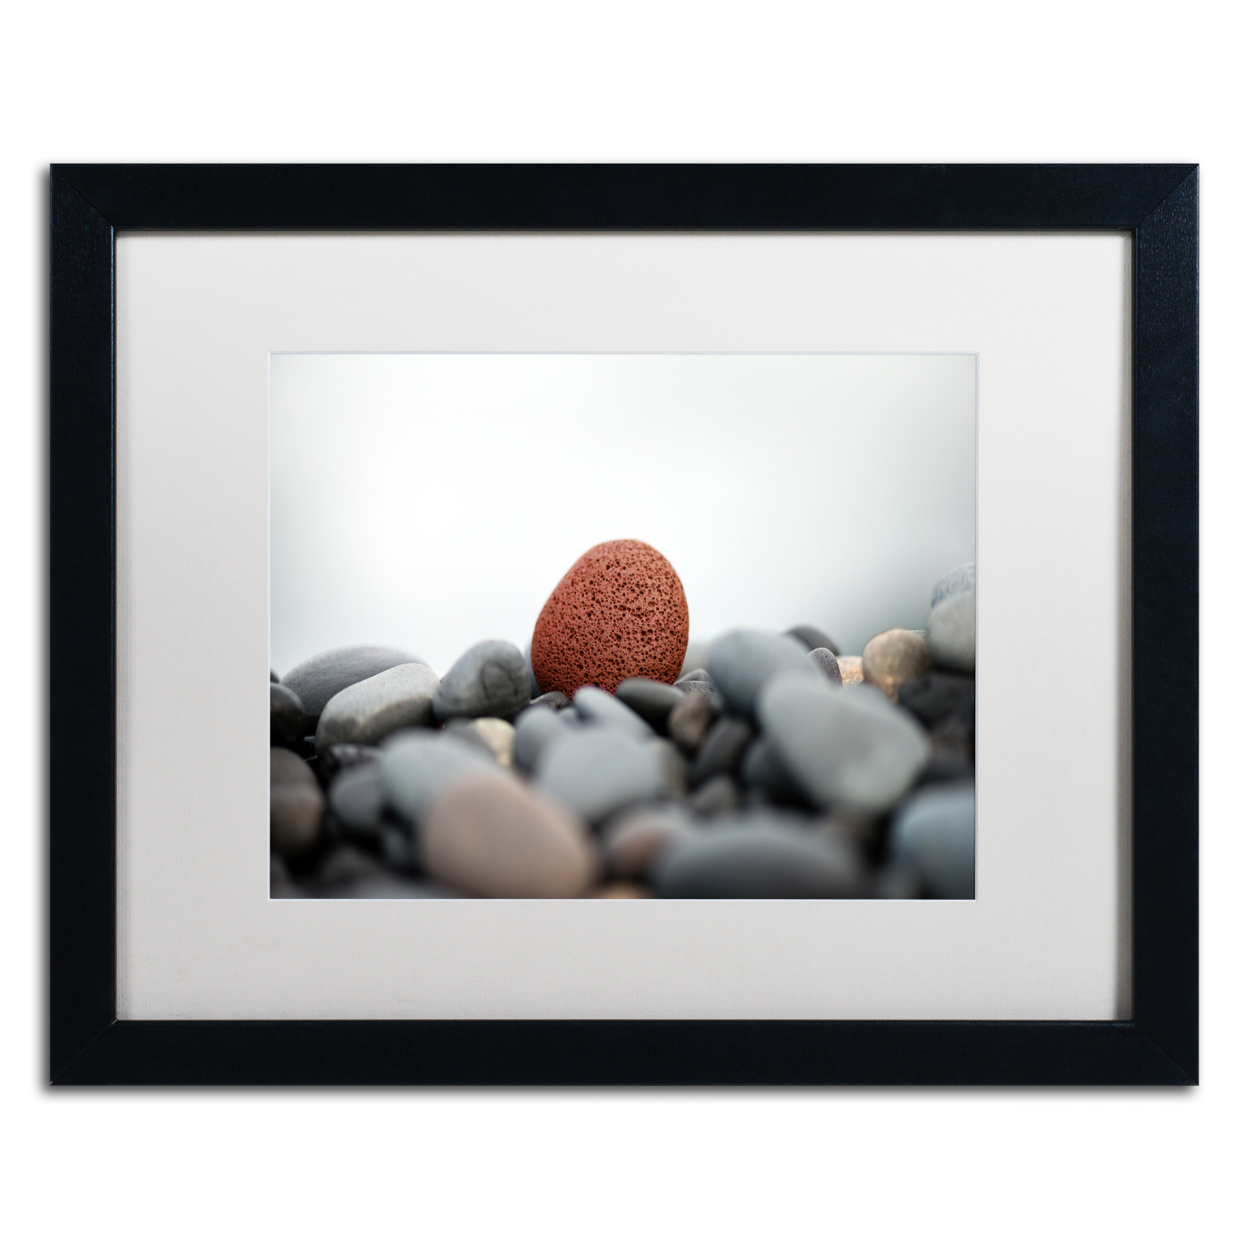 Philippe Sainte-Laudy 'Red Stone' Black Wooden Framed Art 18 X 22 Inches